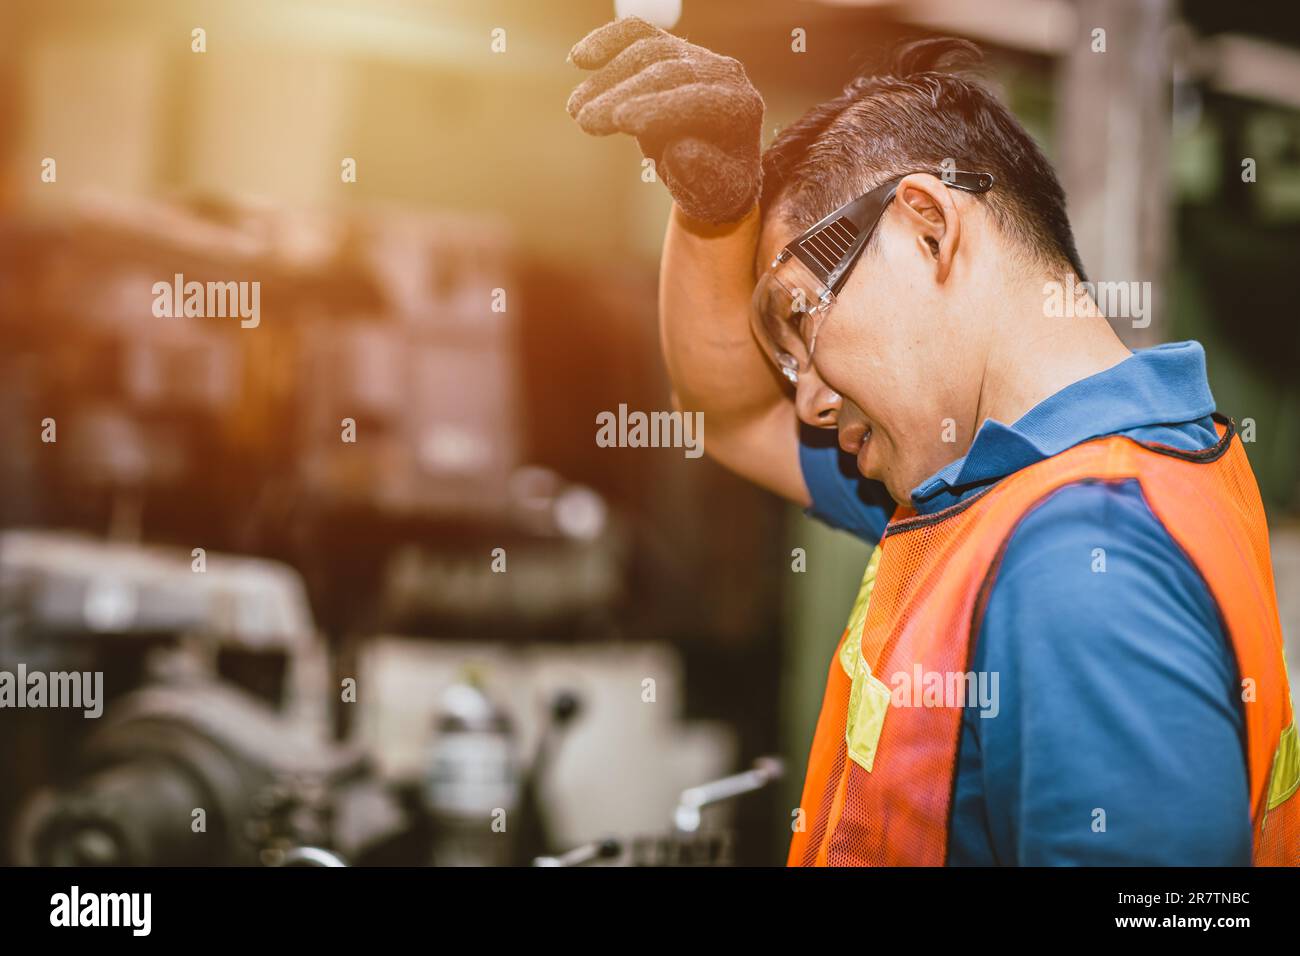 Tired fatigue exhausted engineer feel sick worker from hard working in factory sweat hot bad airflow workplace. Stock Photo